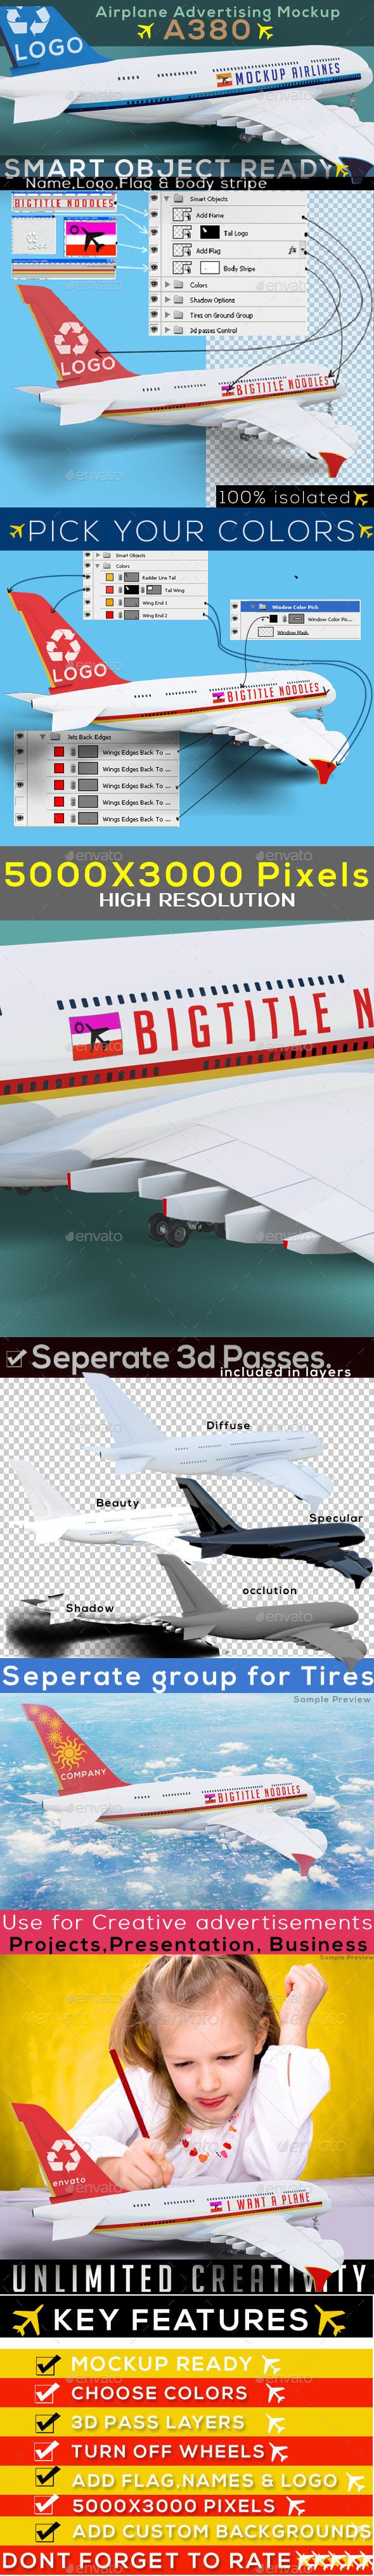 Airbus 20airline 20a 20380 203d 20render 20preview02 20mock 20up 20advertising 20